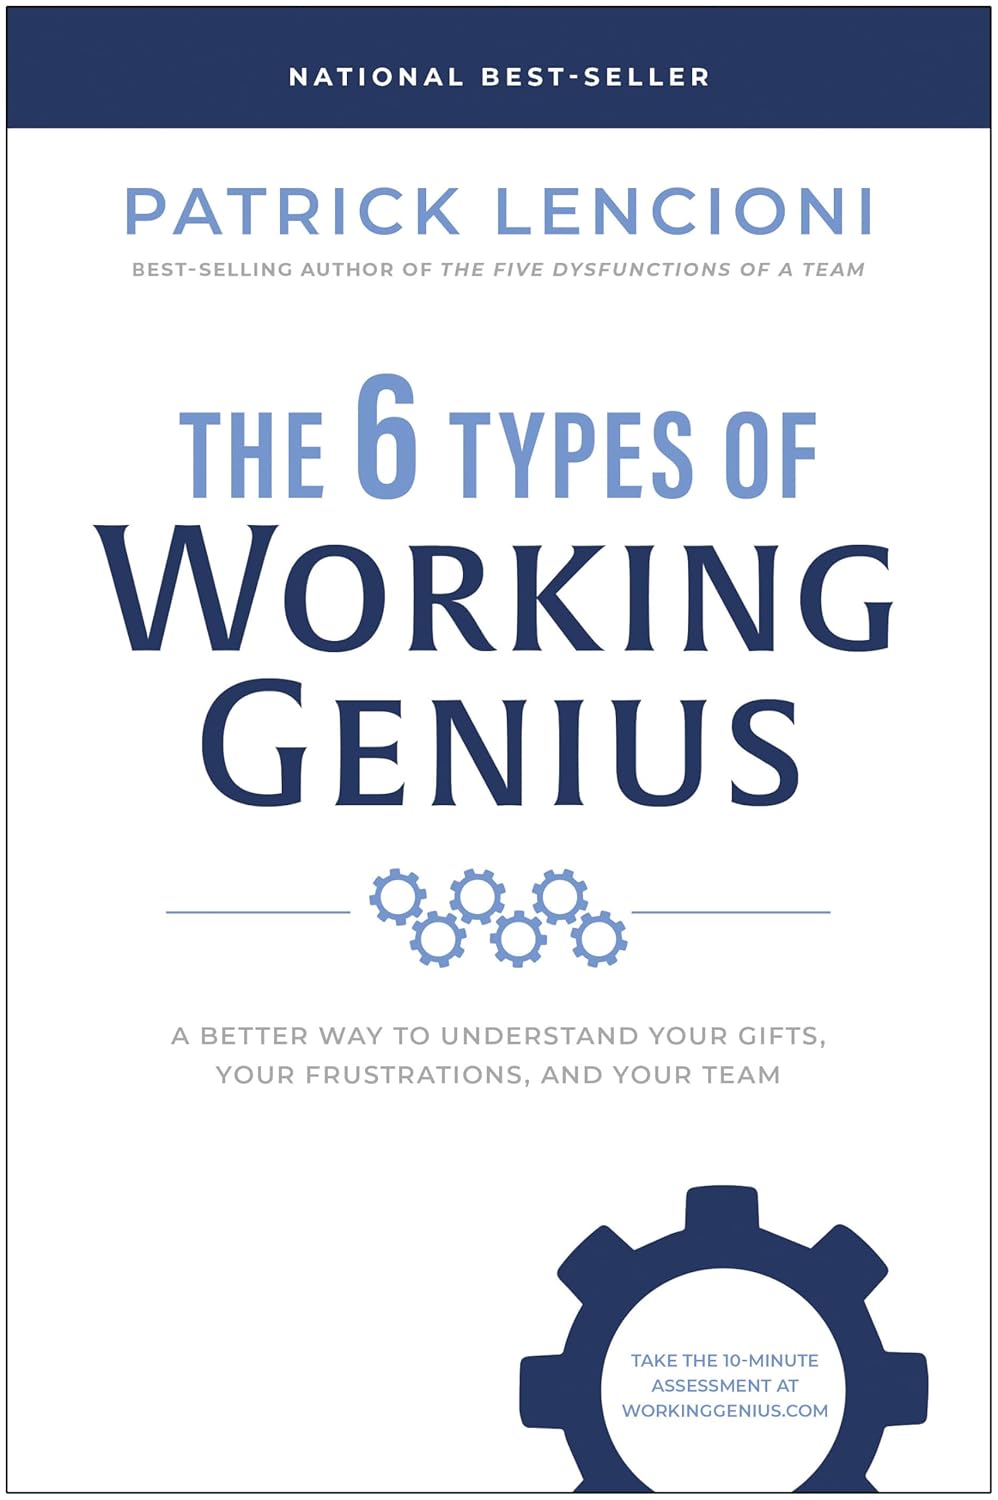 The 6 Types of Working Genius by Patrick M. Lencioni (Author) PAPERBACK